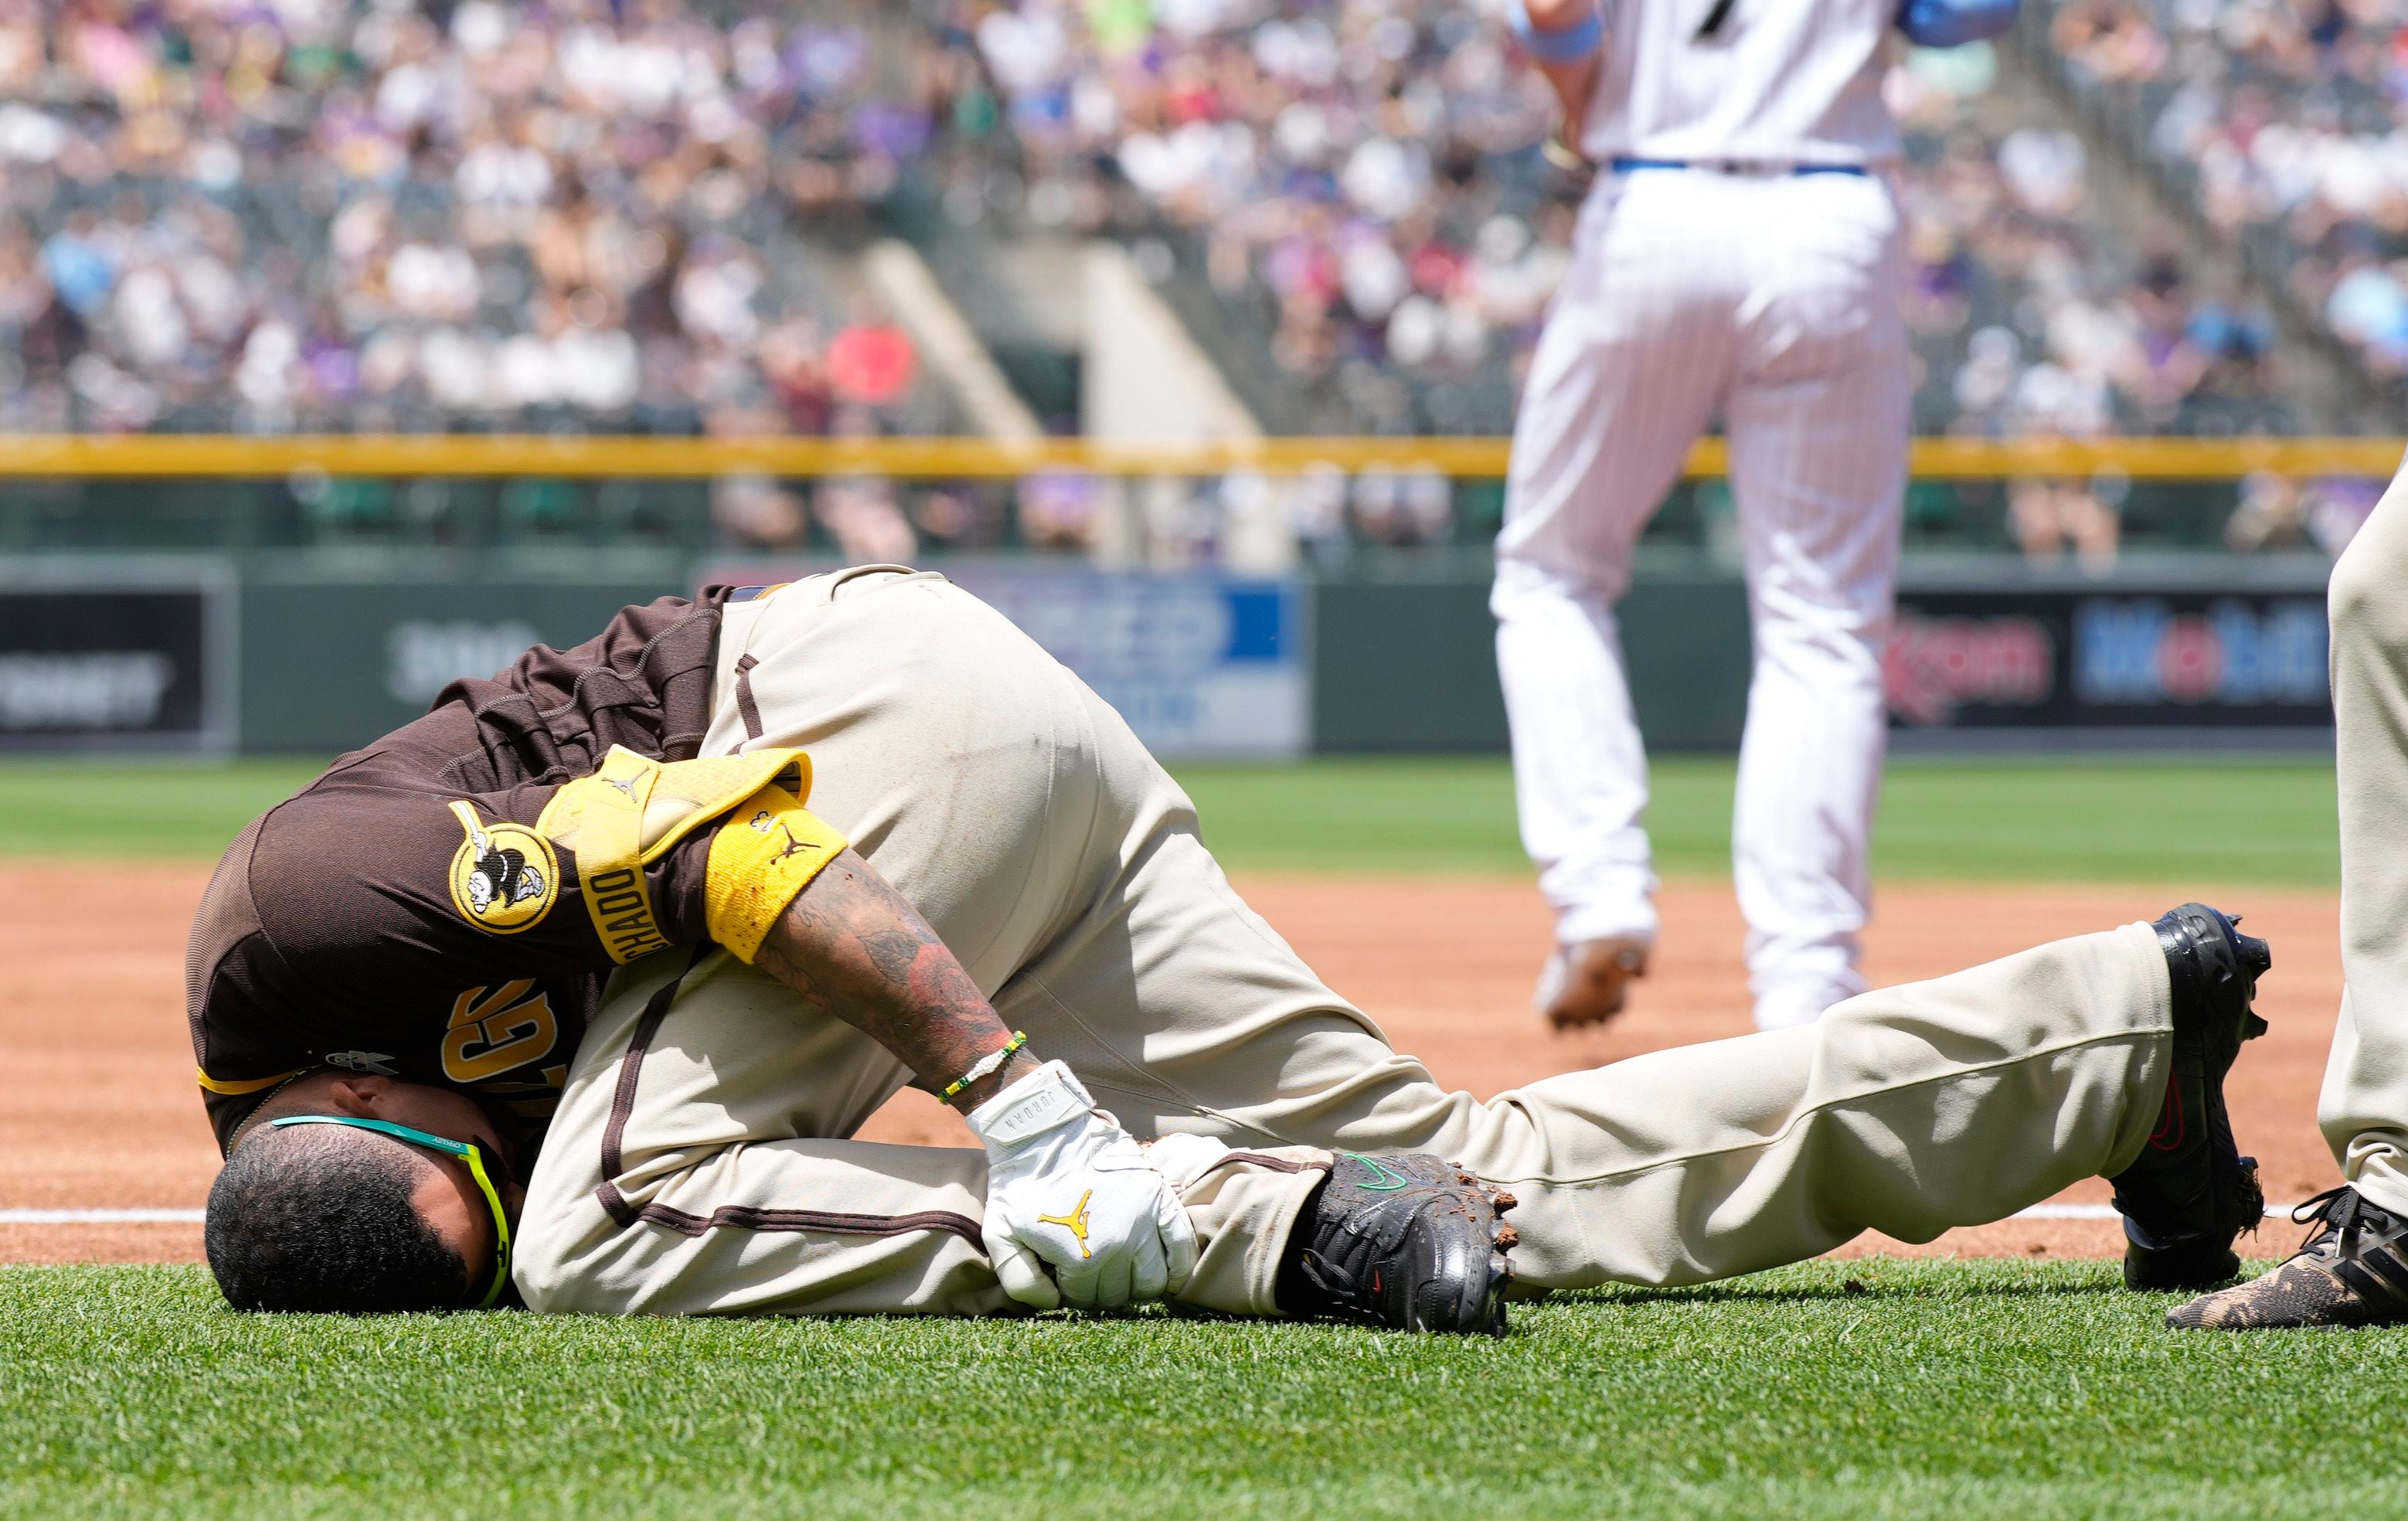 Padres Notes: National Embarrassment, Machado Owns Up to Struggles, Soto OK  After Collision - Sports Illustrated Inside The Padres News, Analysis and  More